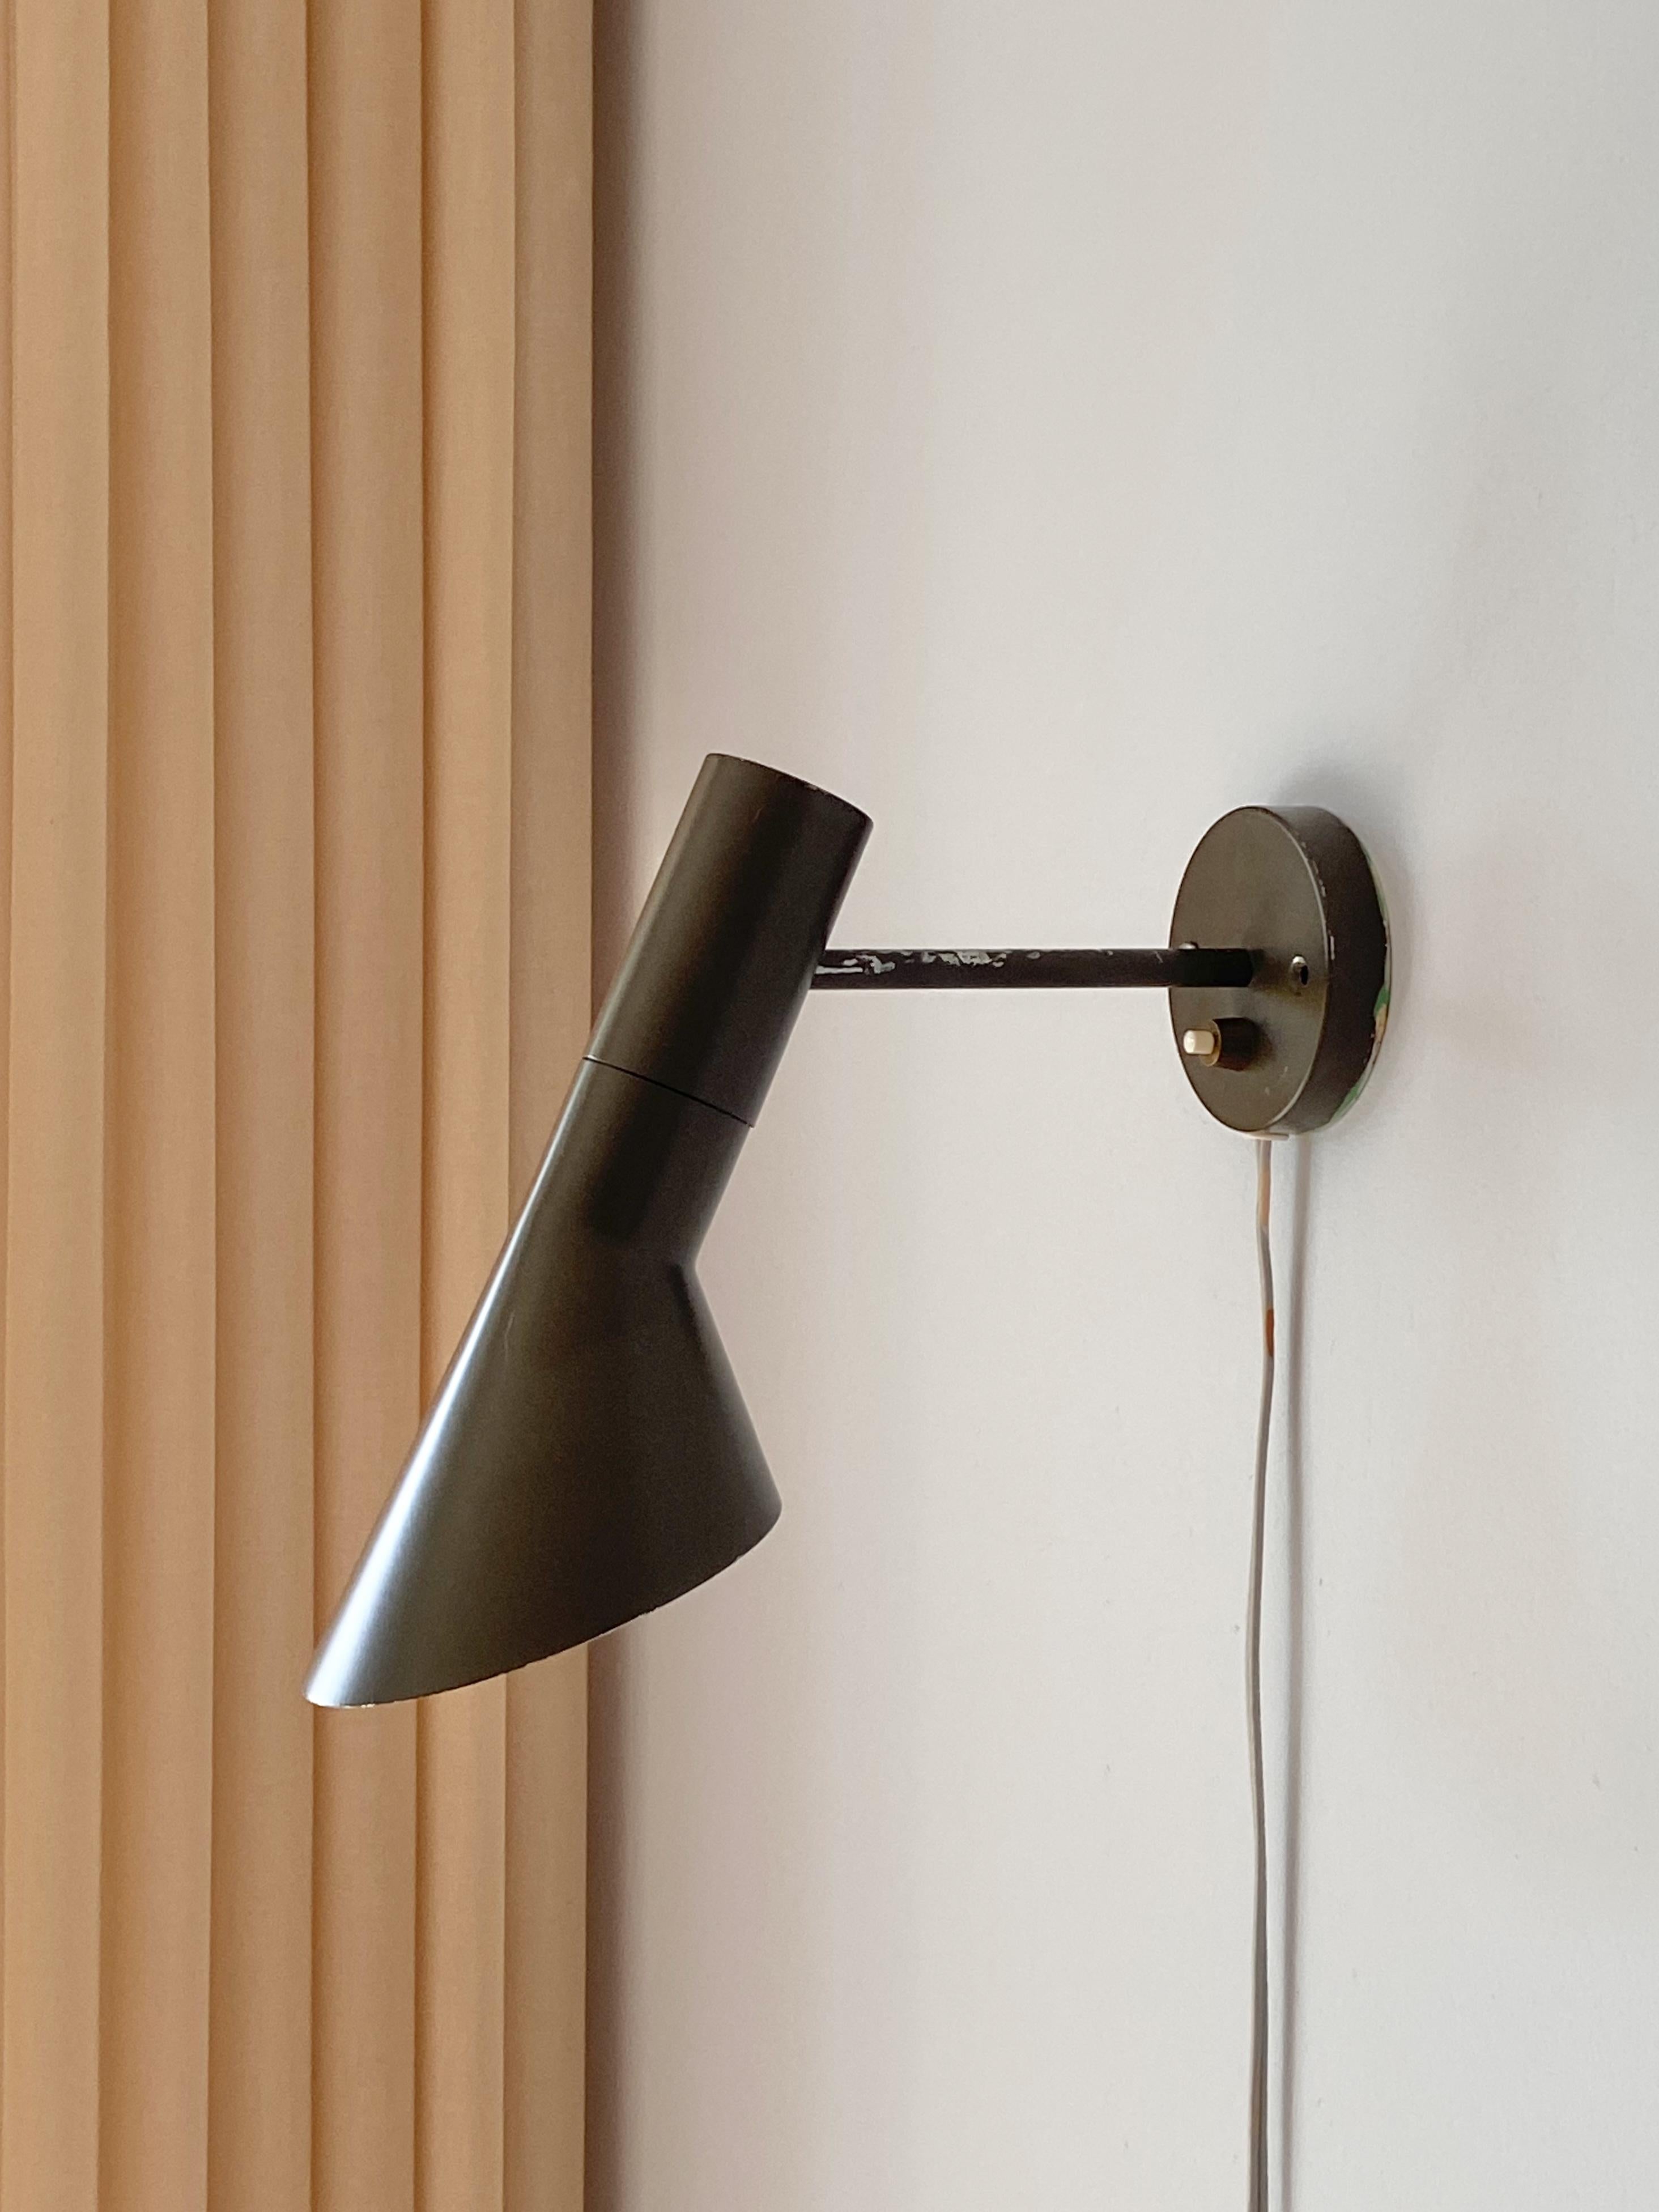 Very very nice old AJ wall lamp Design from 1957 by Arne Jacobsen & produced by Louis Poulsen in the 1965-1969, Made in Denmark. The lamp is in original condition. No parts missing with 1x E14 for  hardwire or Plug-in both possible and ready to use